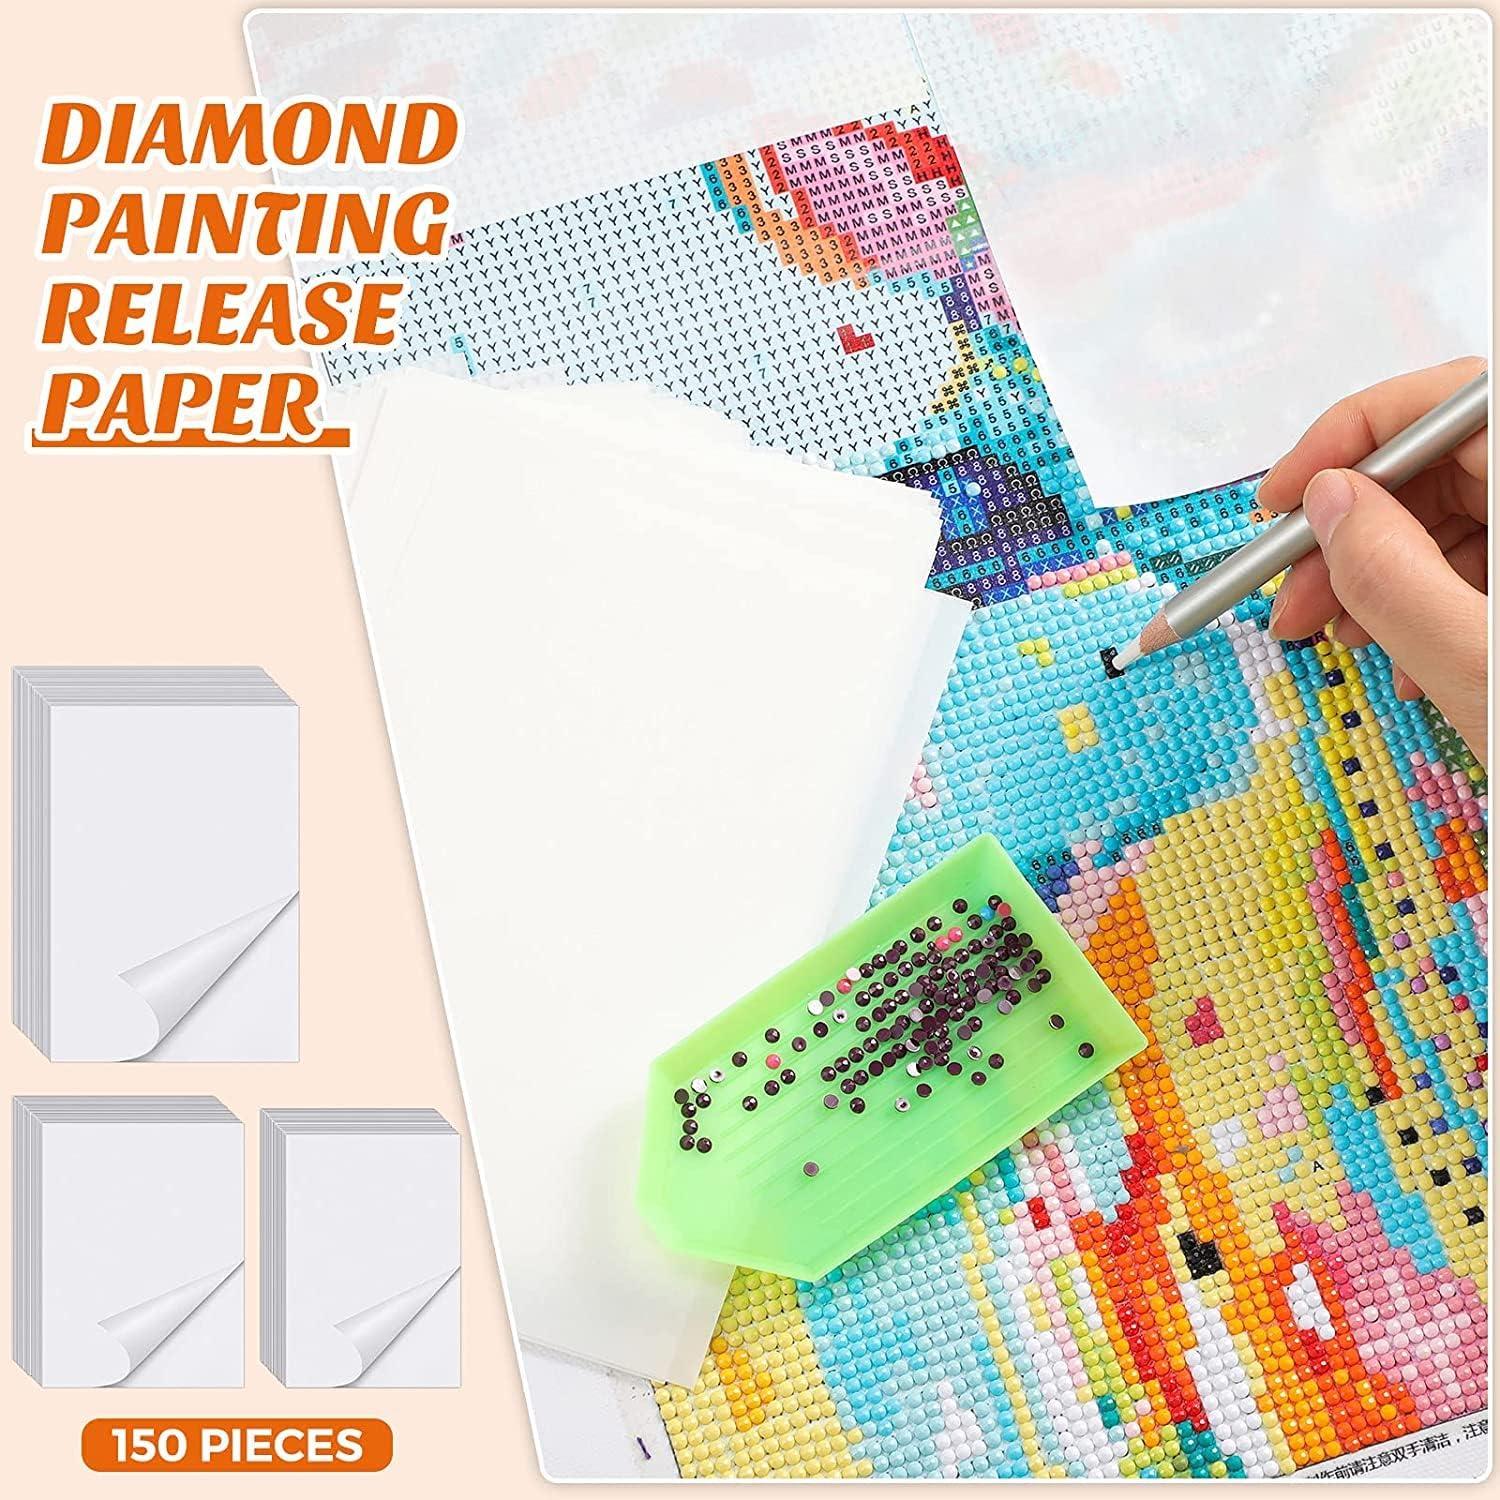 200 Pieces Diamond Painting Release Paper Double-Sided Release Paper  Non-Stick Diamond Painting Cover Replacement Paper for 5D Diamond Painting